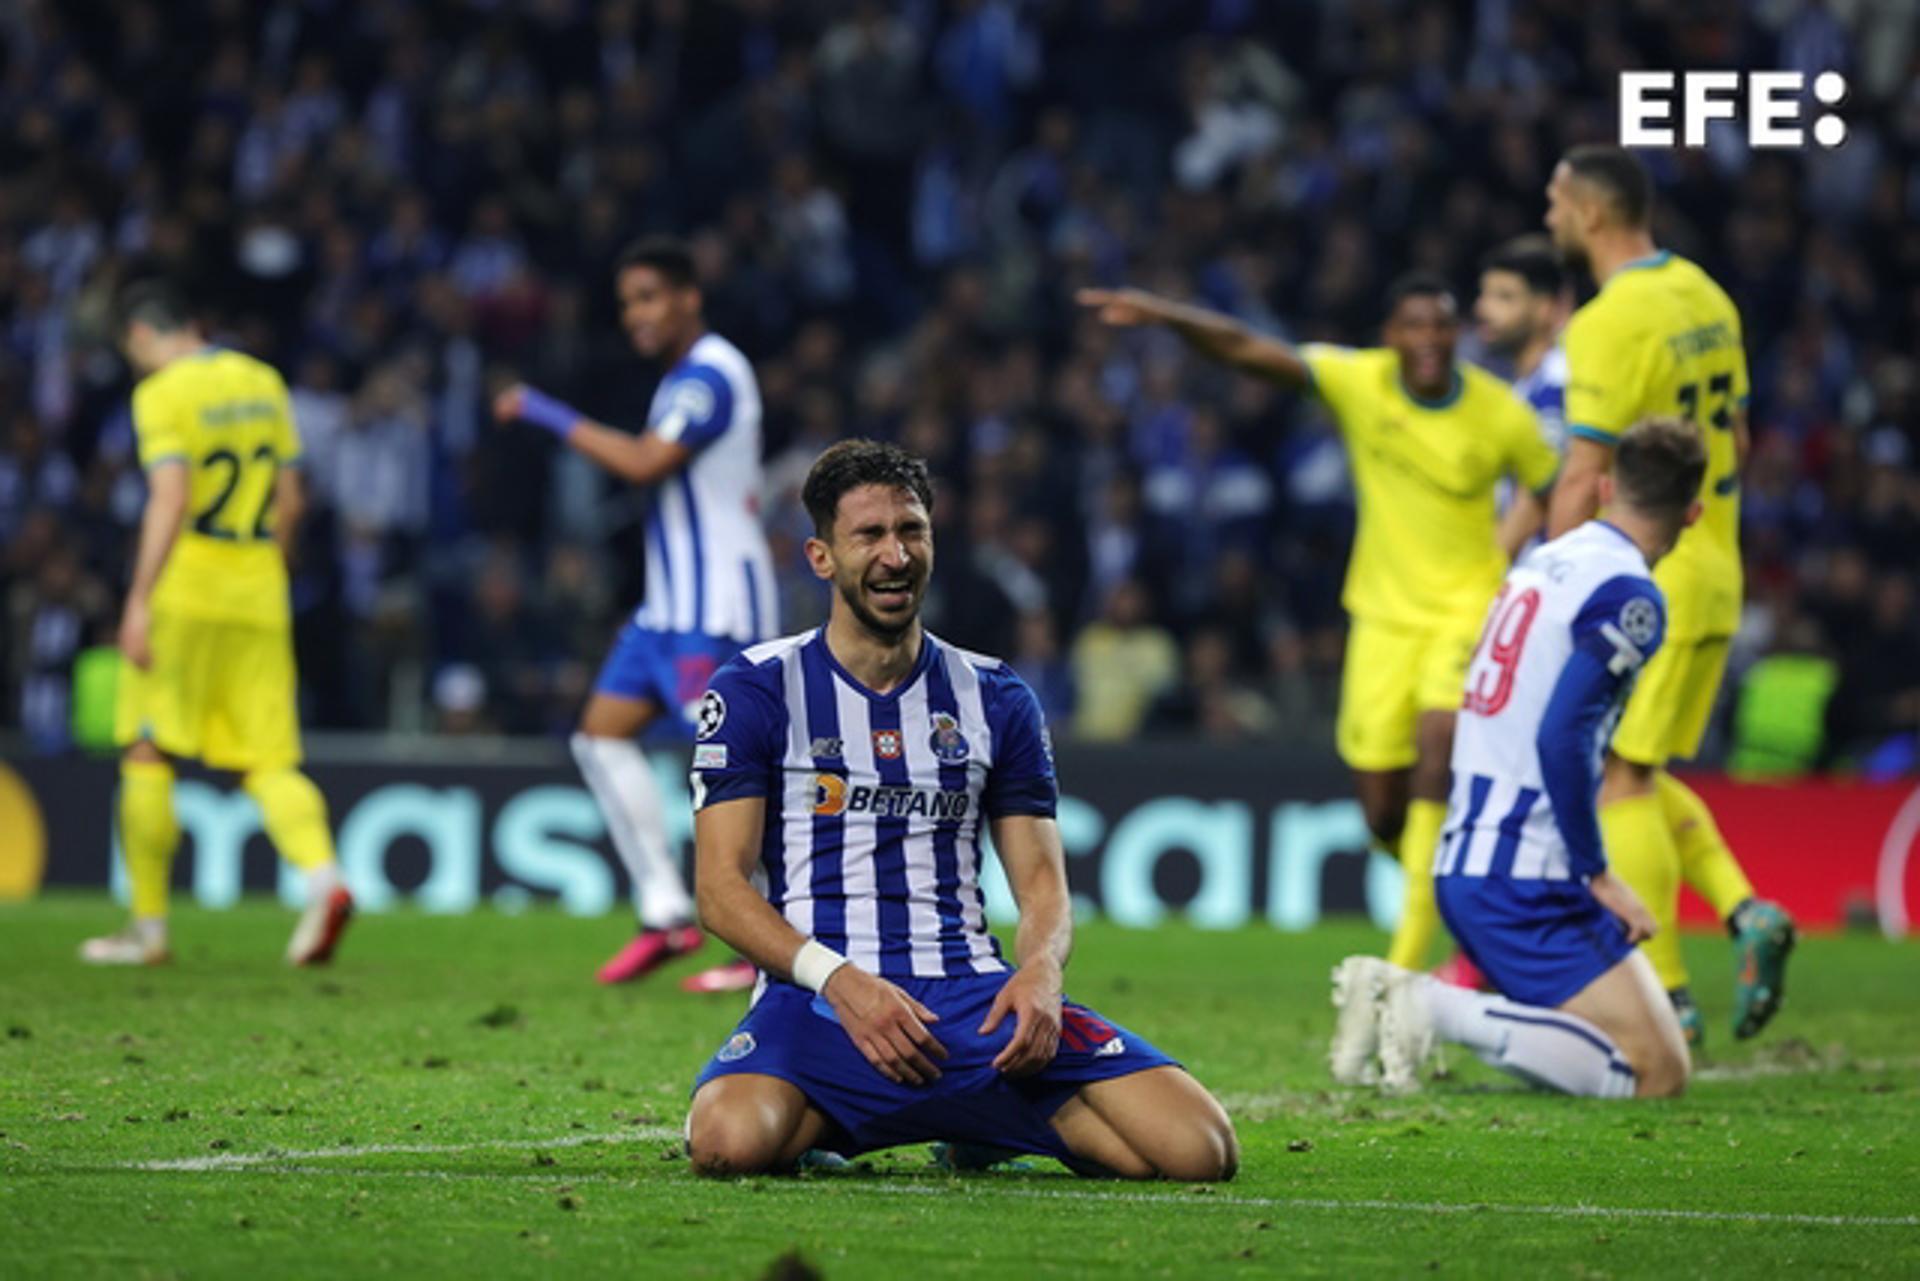 FC Porto's Marko Grujic reacts after missing a scoring chance against Inter Milan during the UEFA Champions League round of 16 second leg in Porto, Portugal, on 14 March 2023. EFE/EPA/ESTELA SILVA
